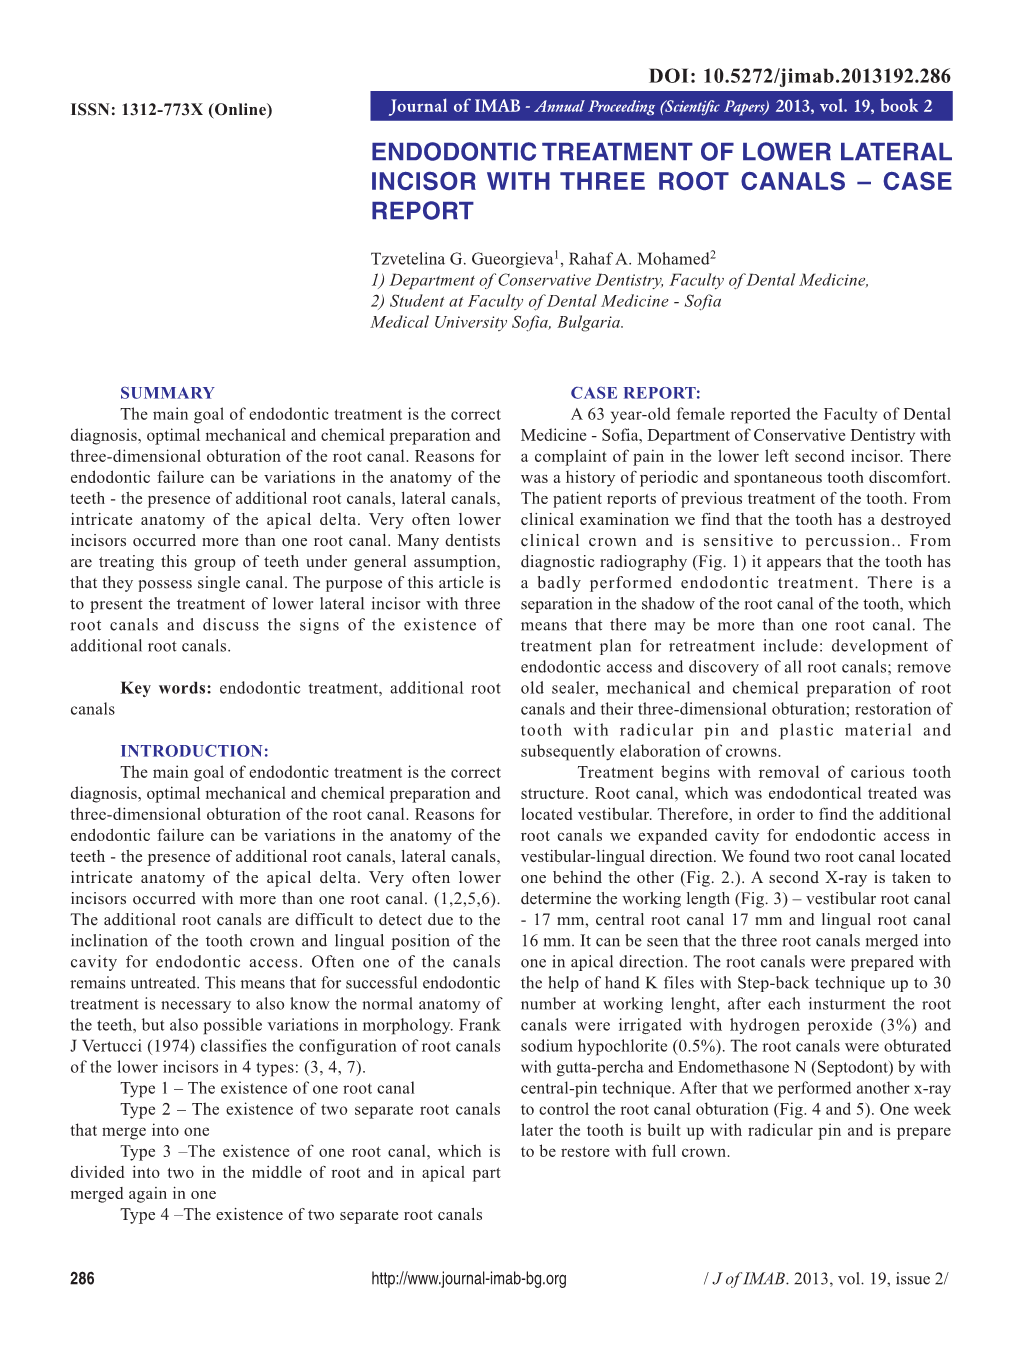 Endodontic Treatment of Lower Lateral Incisor with Three Root Canals – Case Report